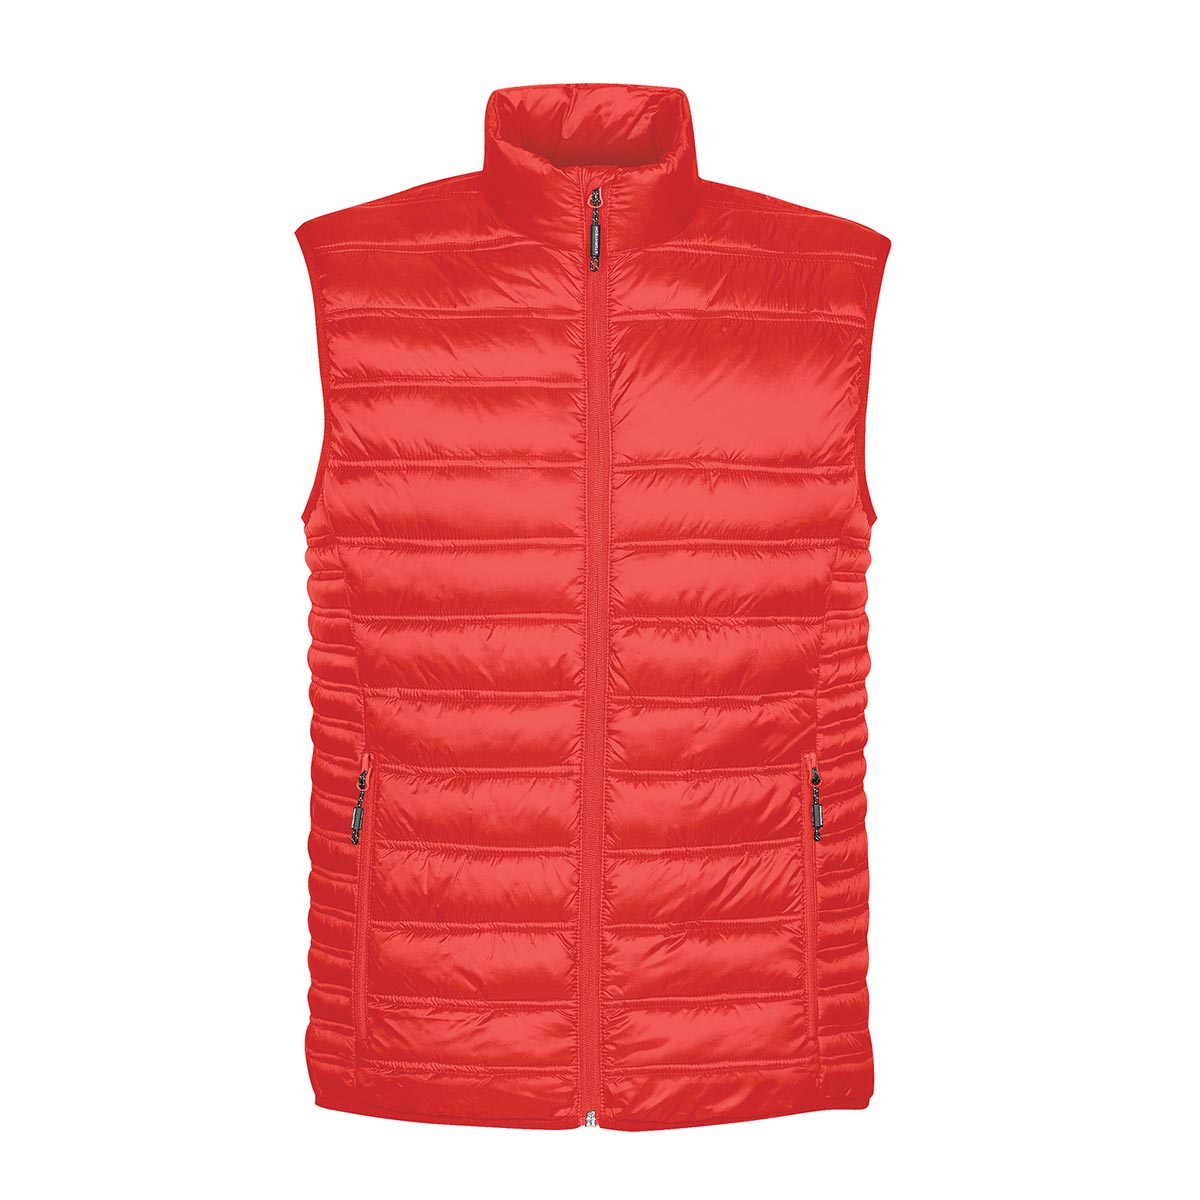 Stormtech PFV-2 - Gravity Thermal Vest - stormtech vest discounted at 20%  for $88.00 compare at $120.00